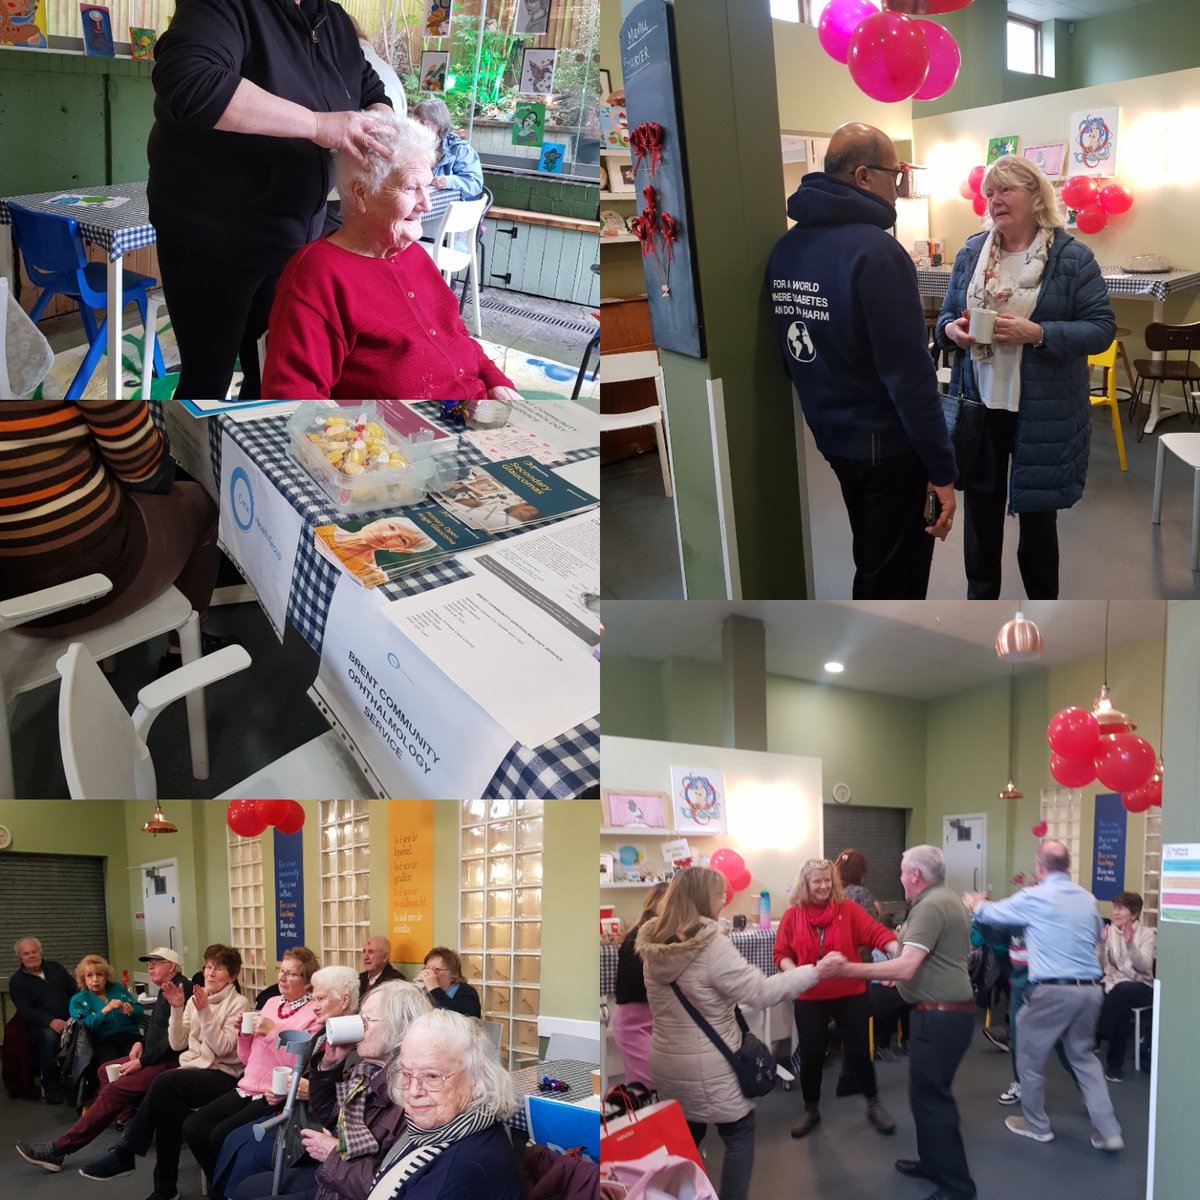 We delivered a packed programme of fun activities and information sessions at our Valentine's Day Health and Wellbeing event. The day was a celebration of friendships made through engagement in our services. #MentalHealthSupport #dementia #irishelders #olderinlondon #benefitshelp